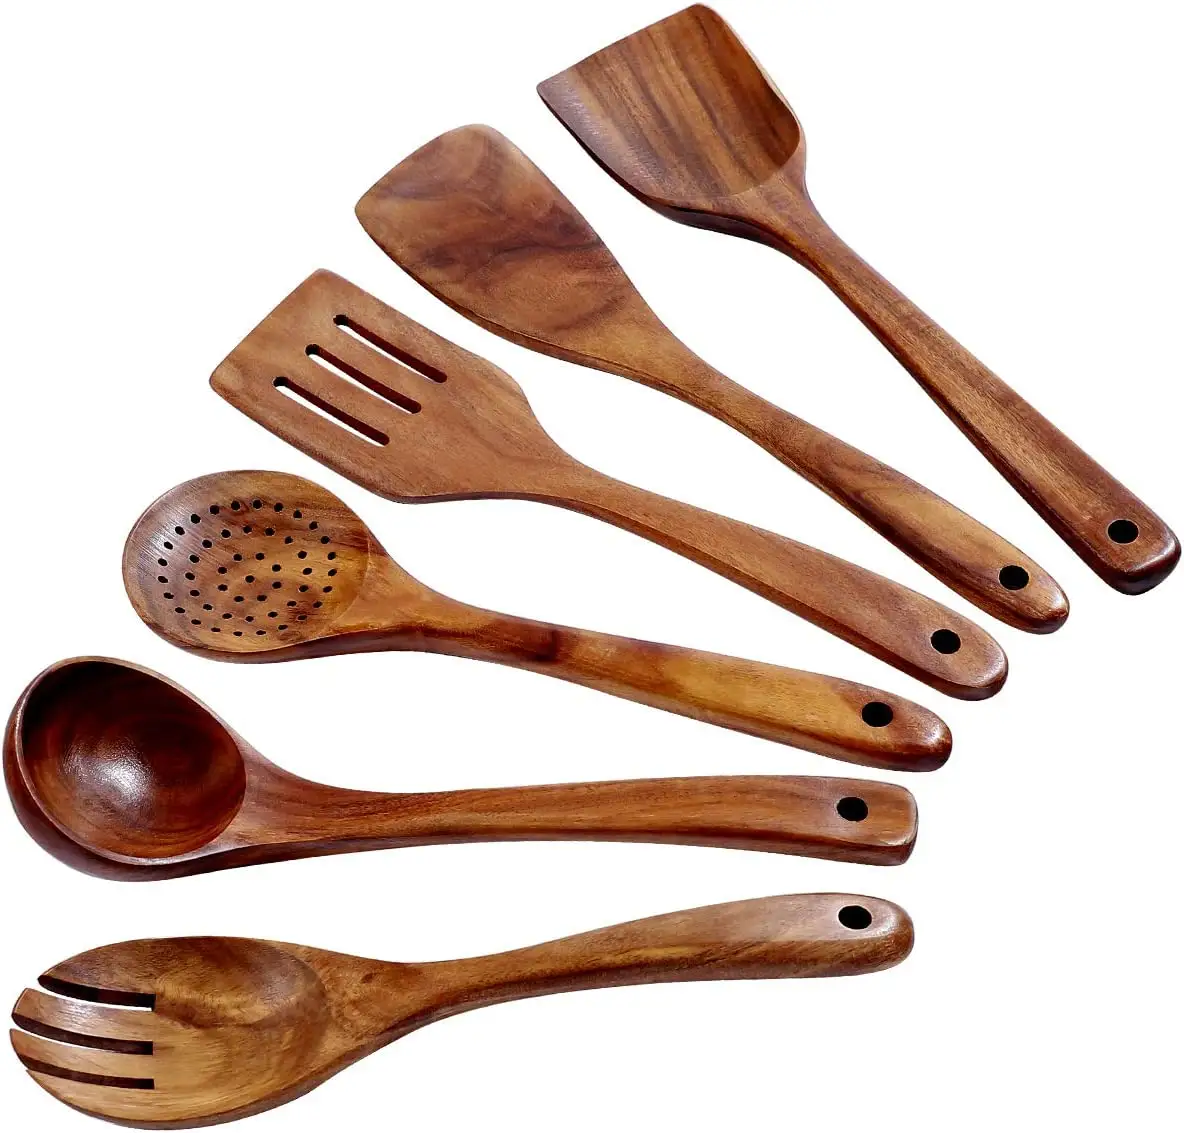 Wooden kitchen set safety bamboo cooking set with holes organic teak cooking spoon Wooden Spoons